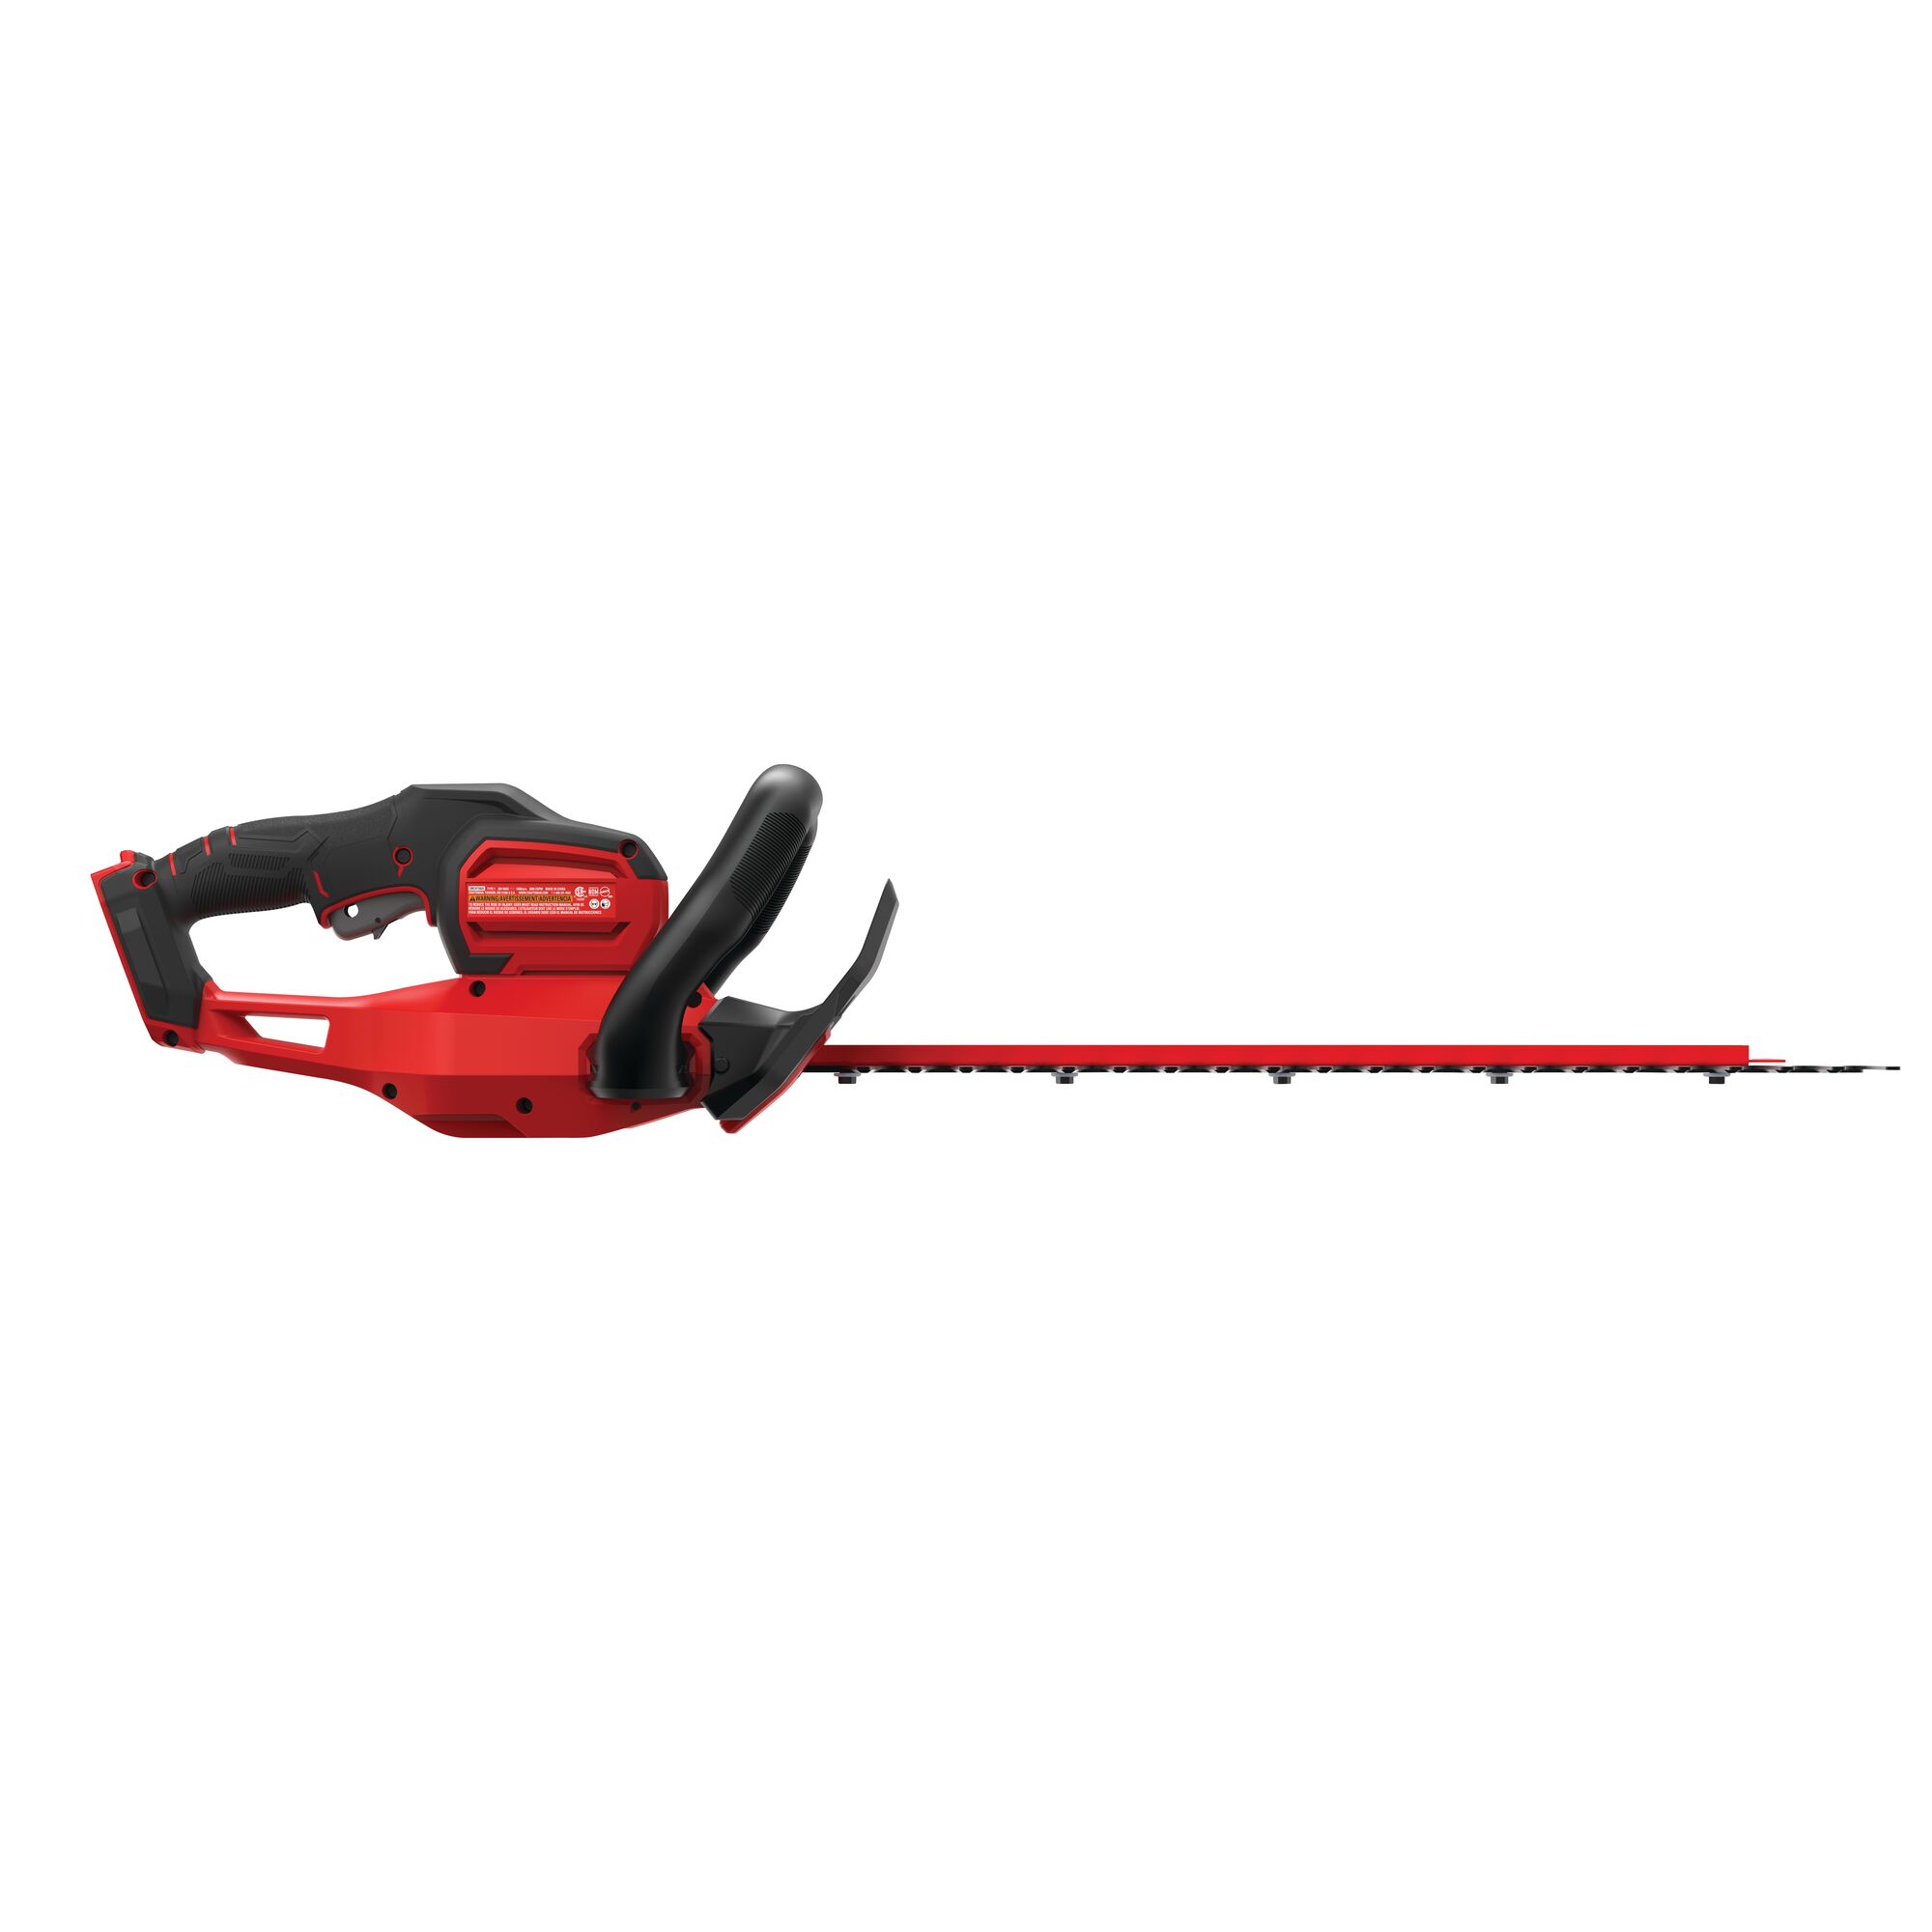 Right profile  view of cordless 22 inch hedge trimmer.